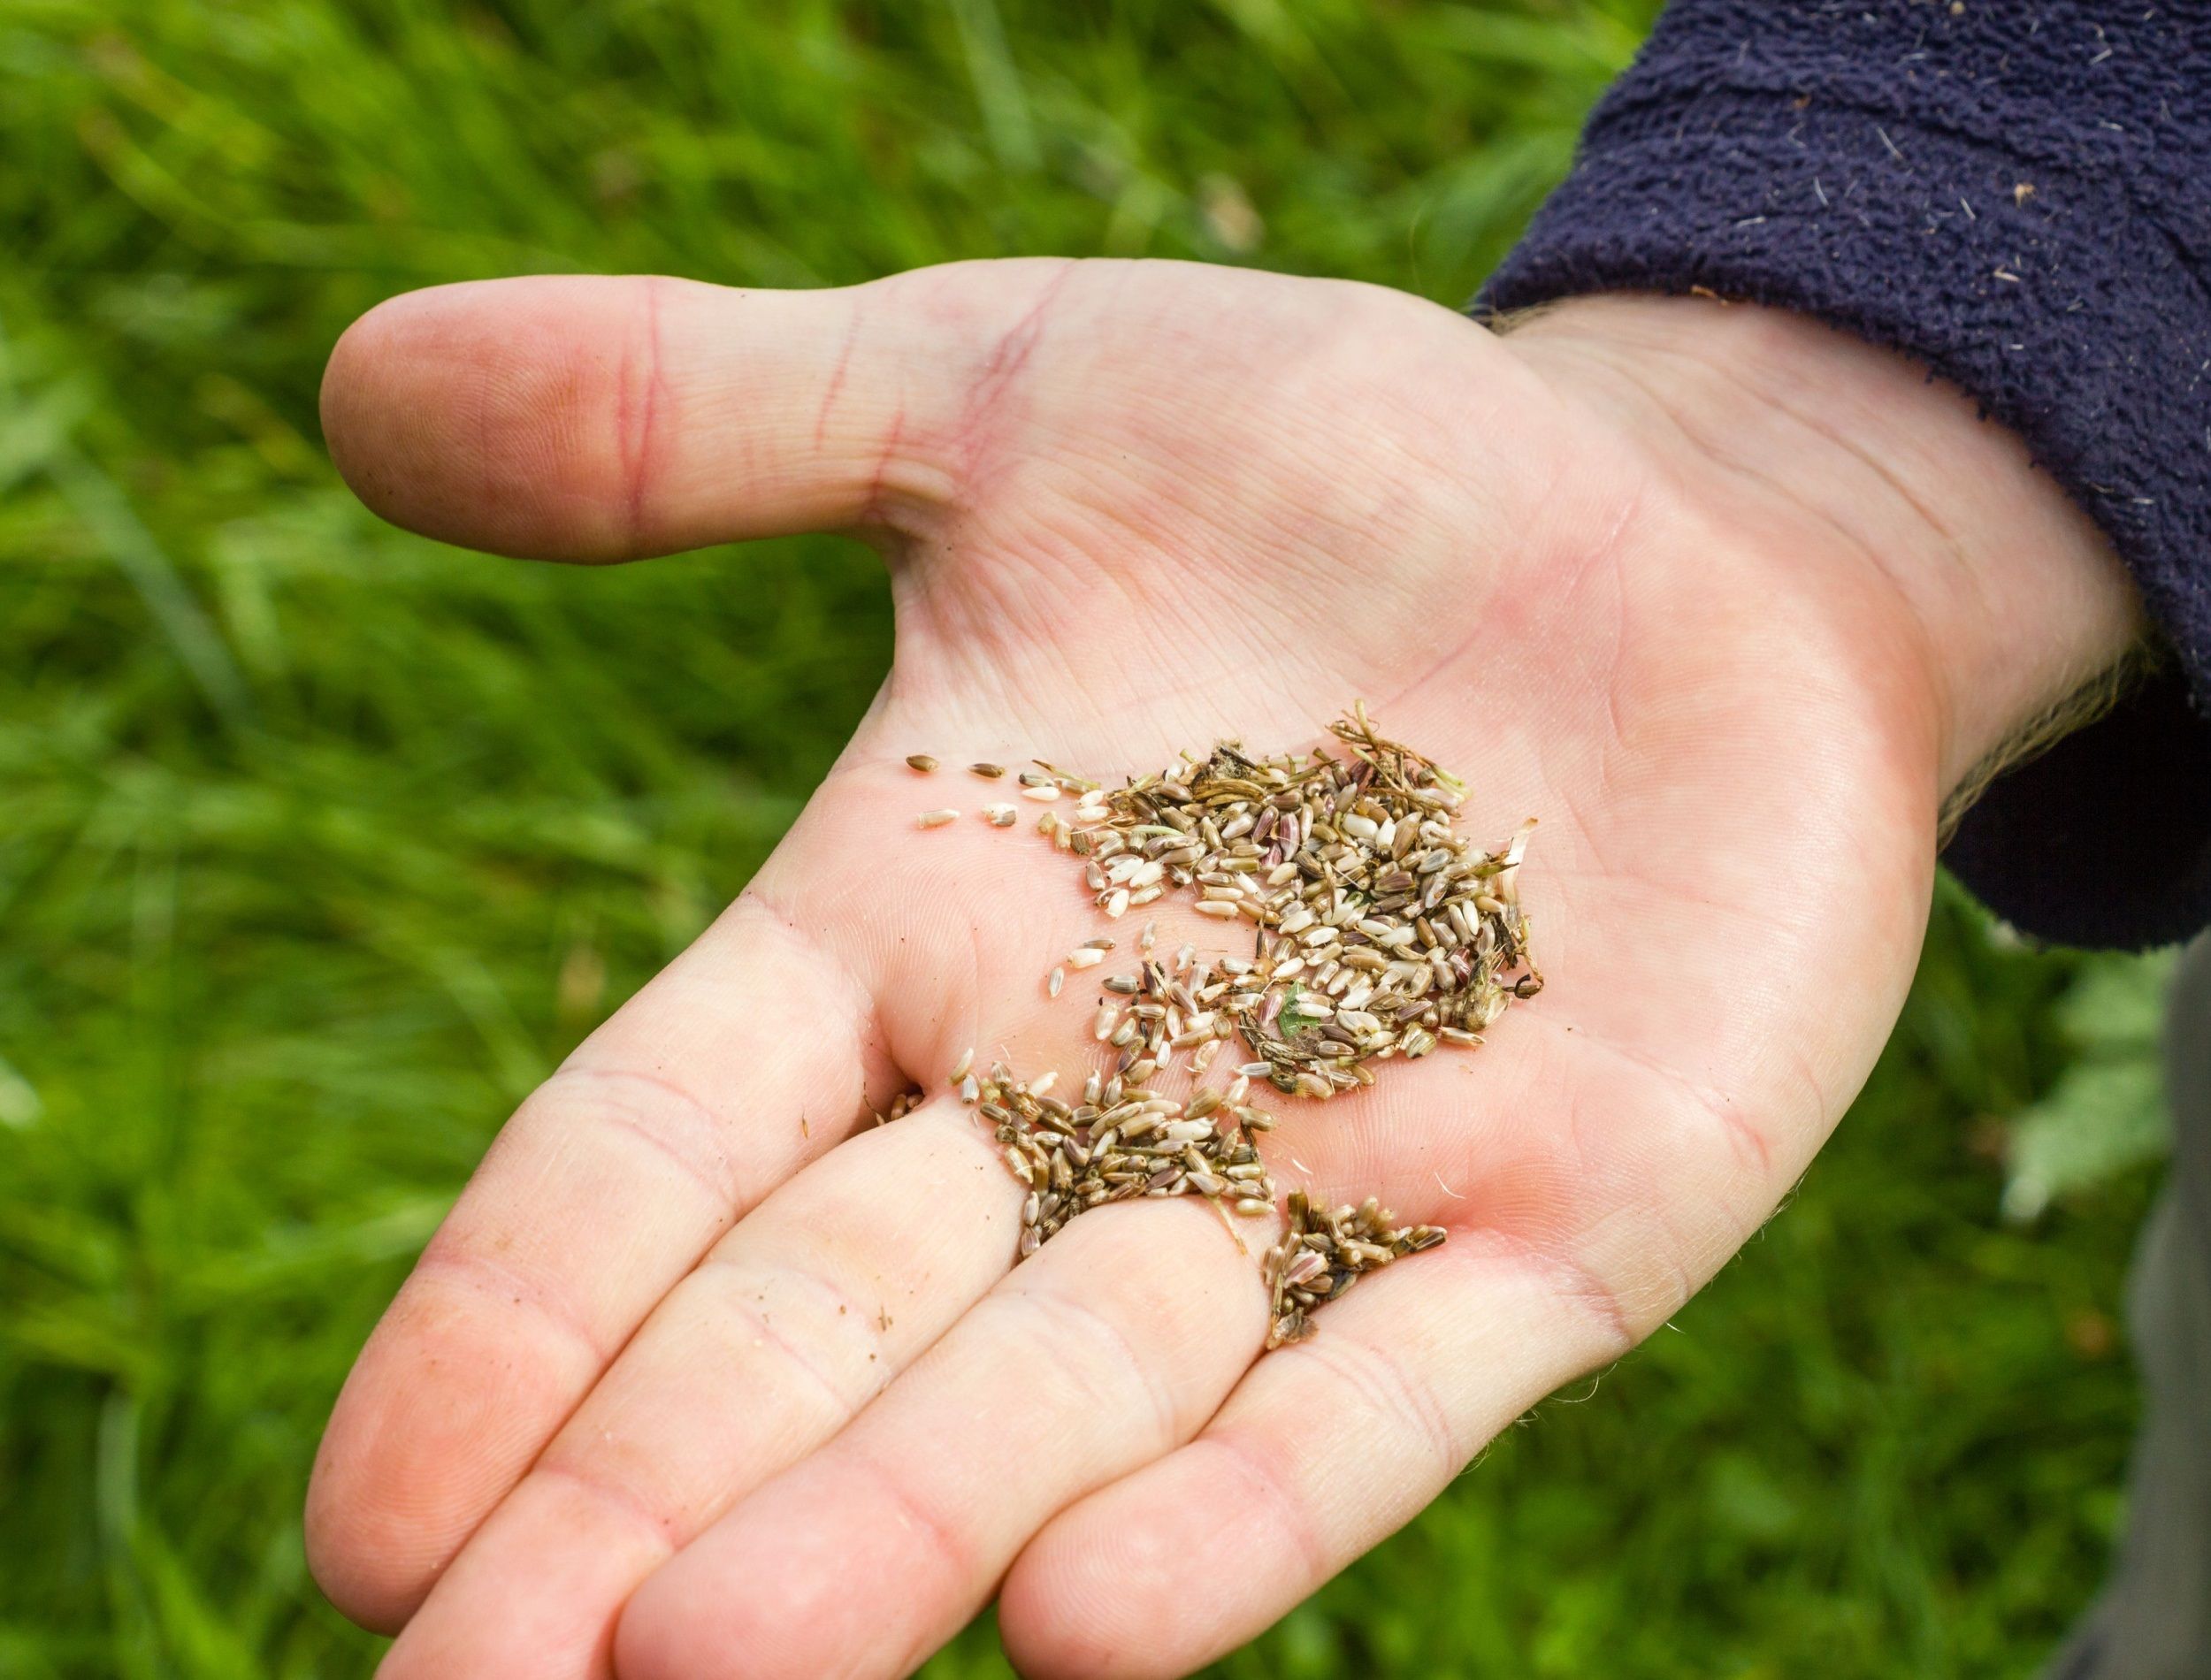 Man's hand holding wildflower seed that has been collected